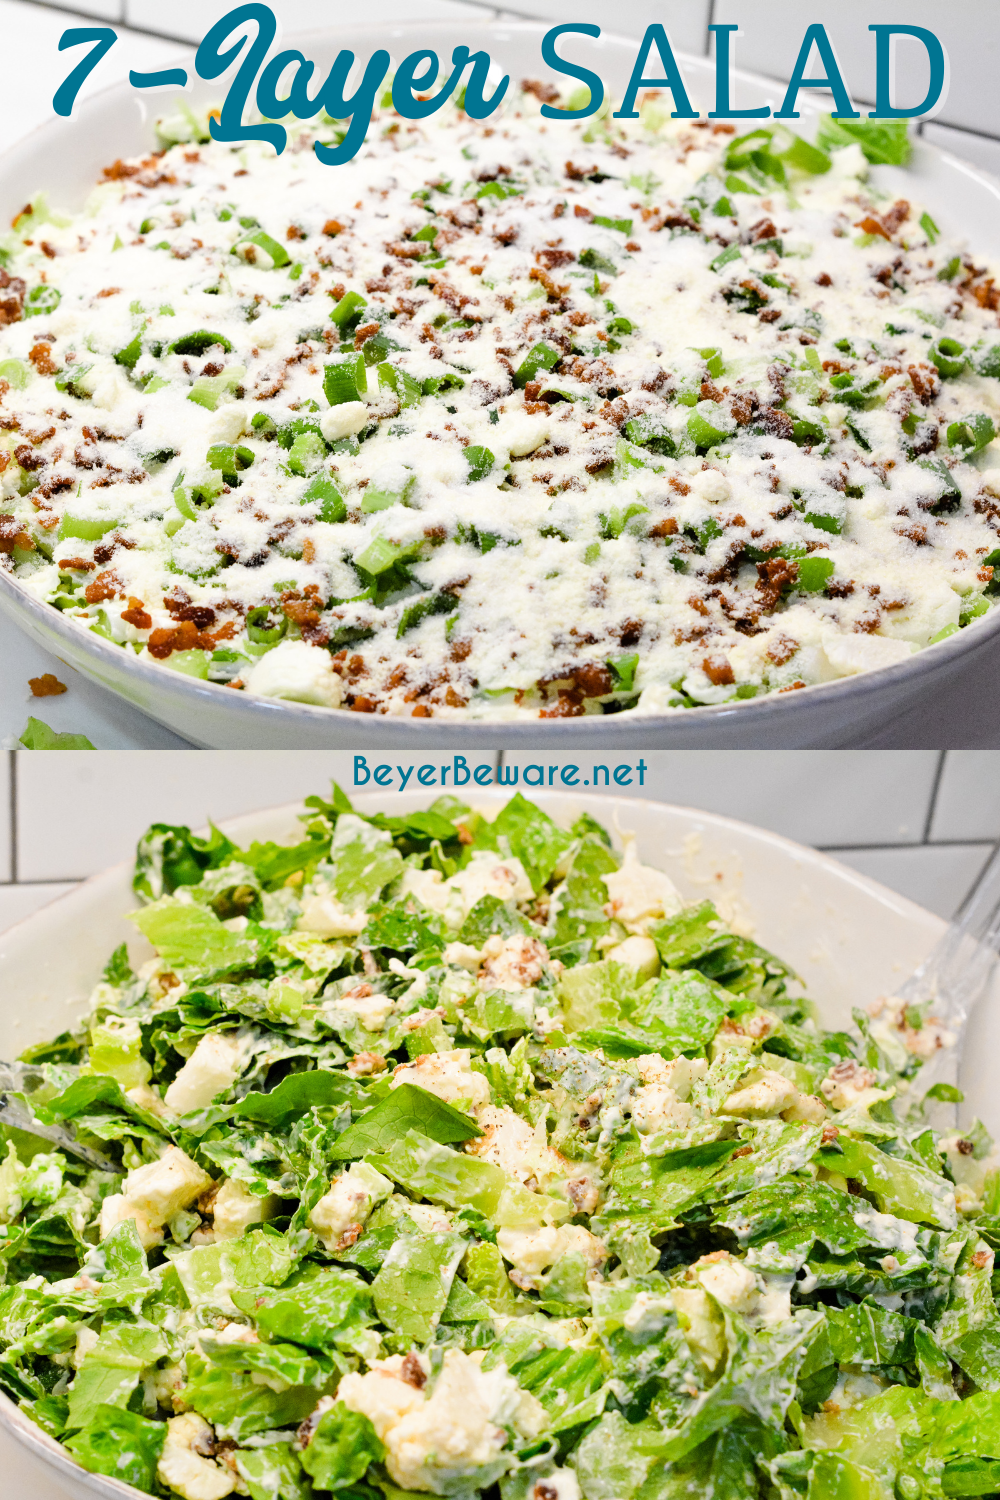 Overnight lettuce salad is my grandmother's version of 7 layer salad made with lettuce, cauliflower, mayonnaise, onions, celery, bacon, and parmesan cheese.